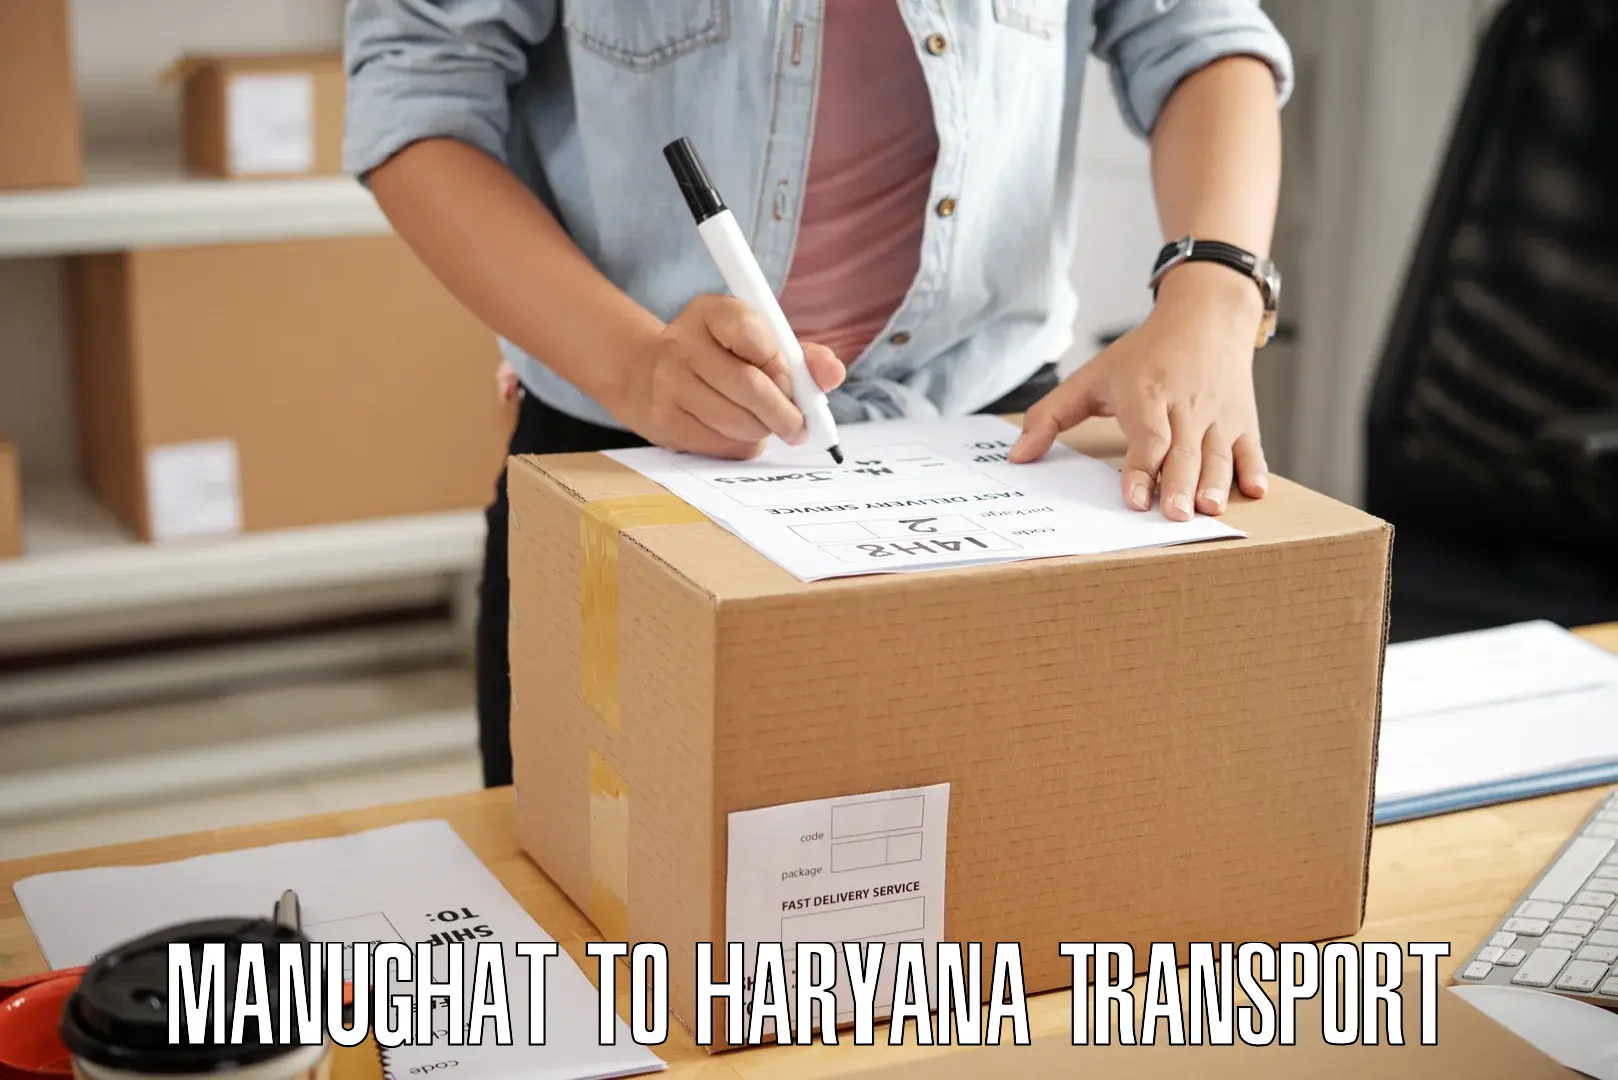 Nearby transport service Manughat to Haryana